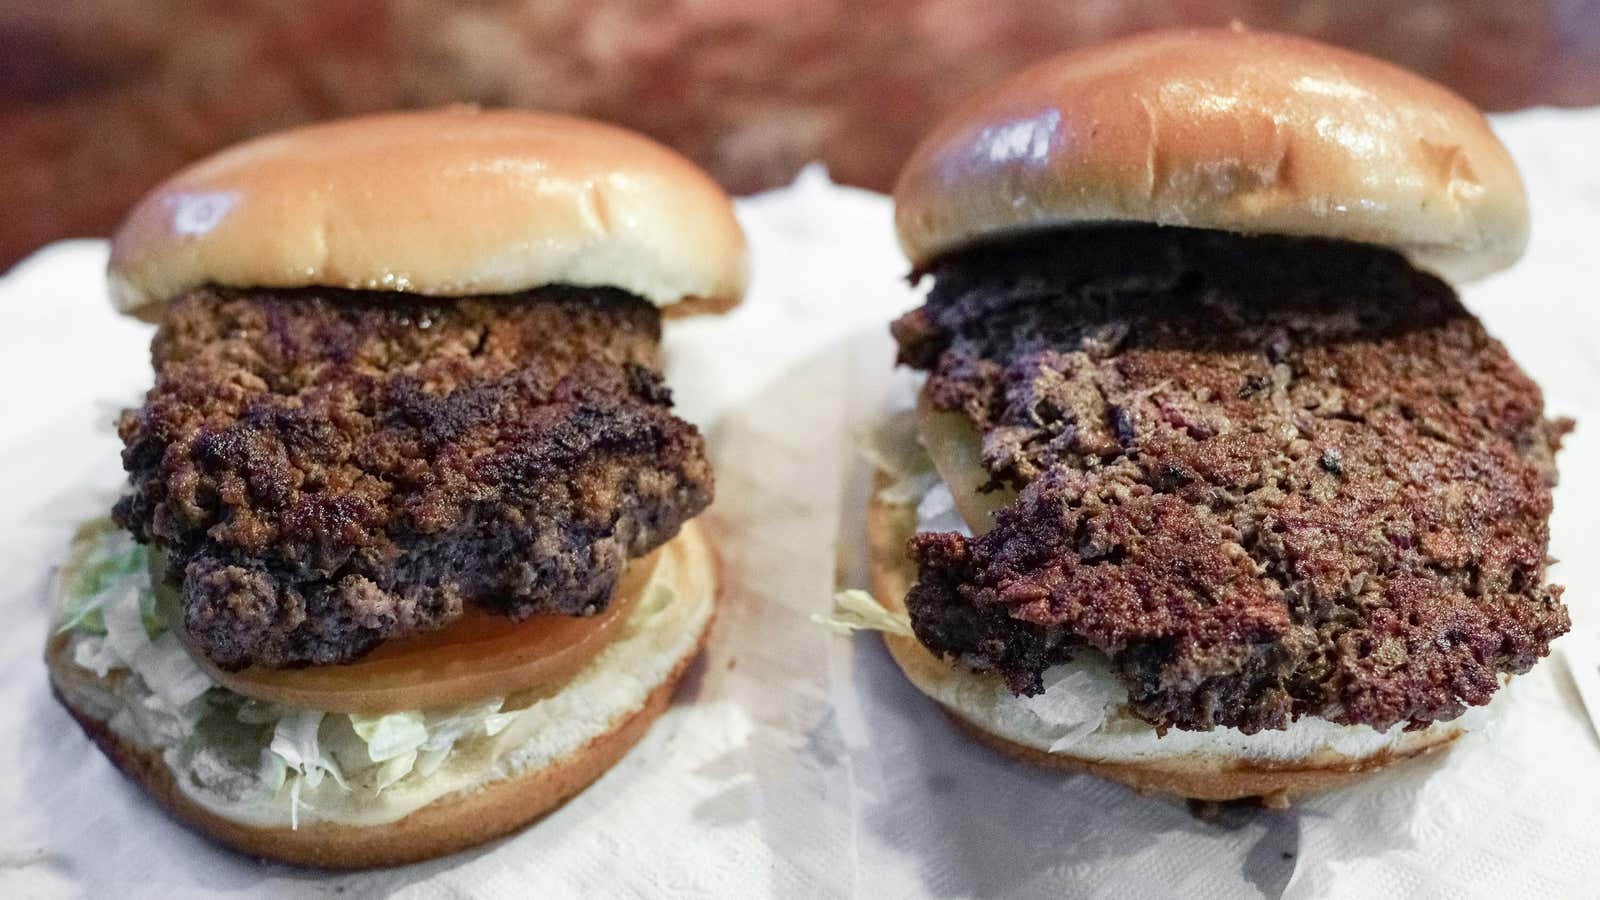 Veggie burgers are poised to mimic the meat industry’s mistakes.